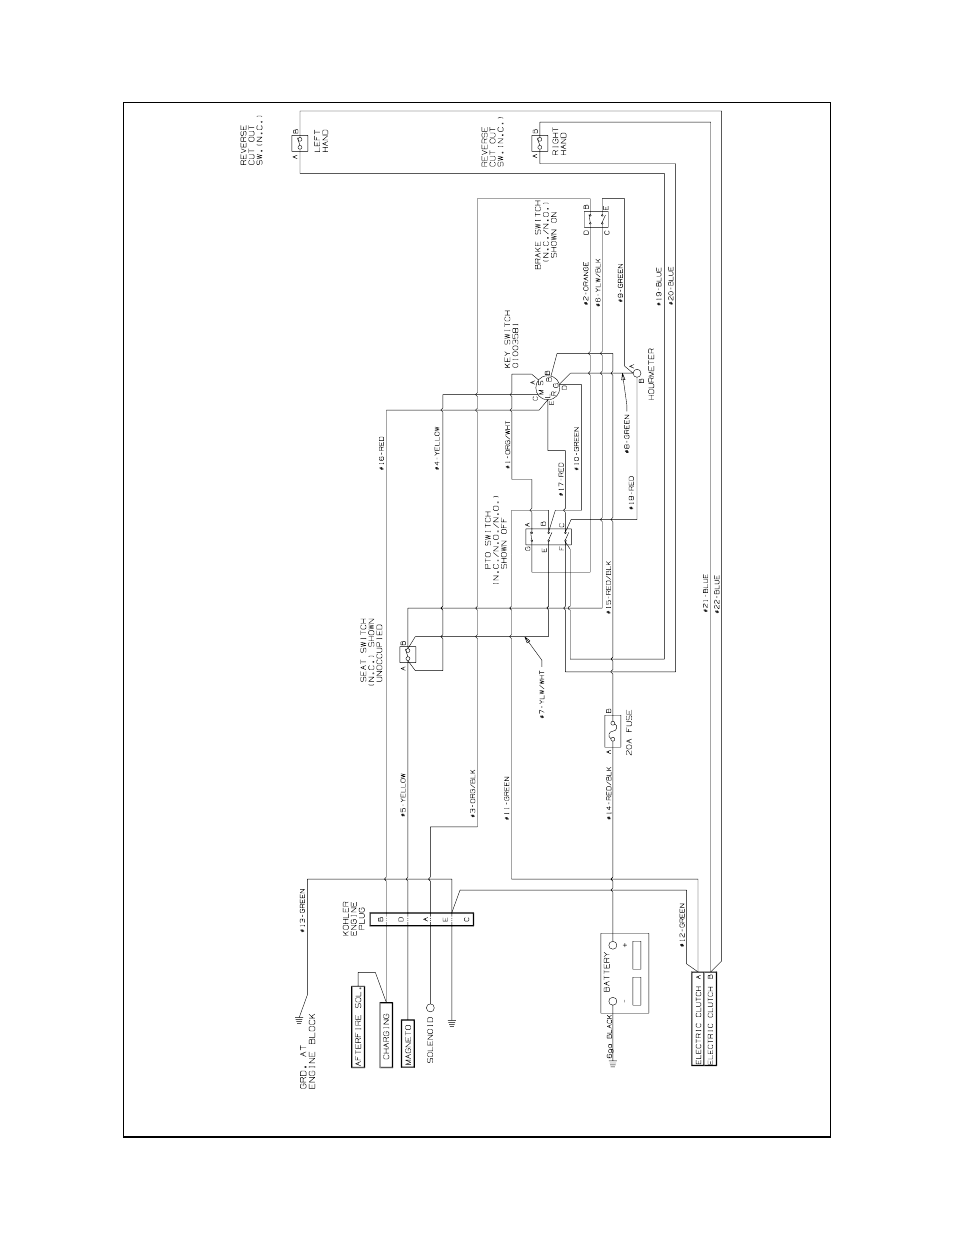 Wiring Diagram Cub Cadet 23hp Z Force 60 User Manual Page 27 32